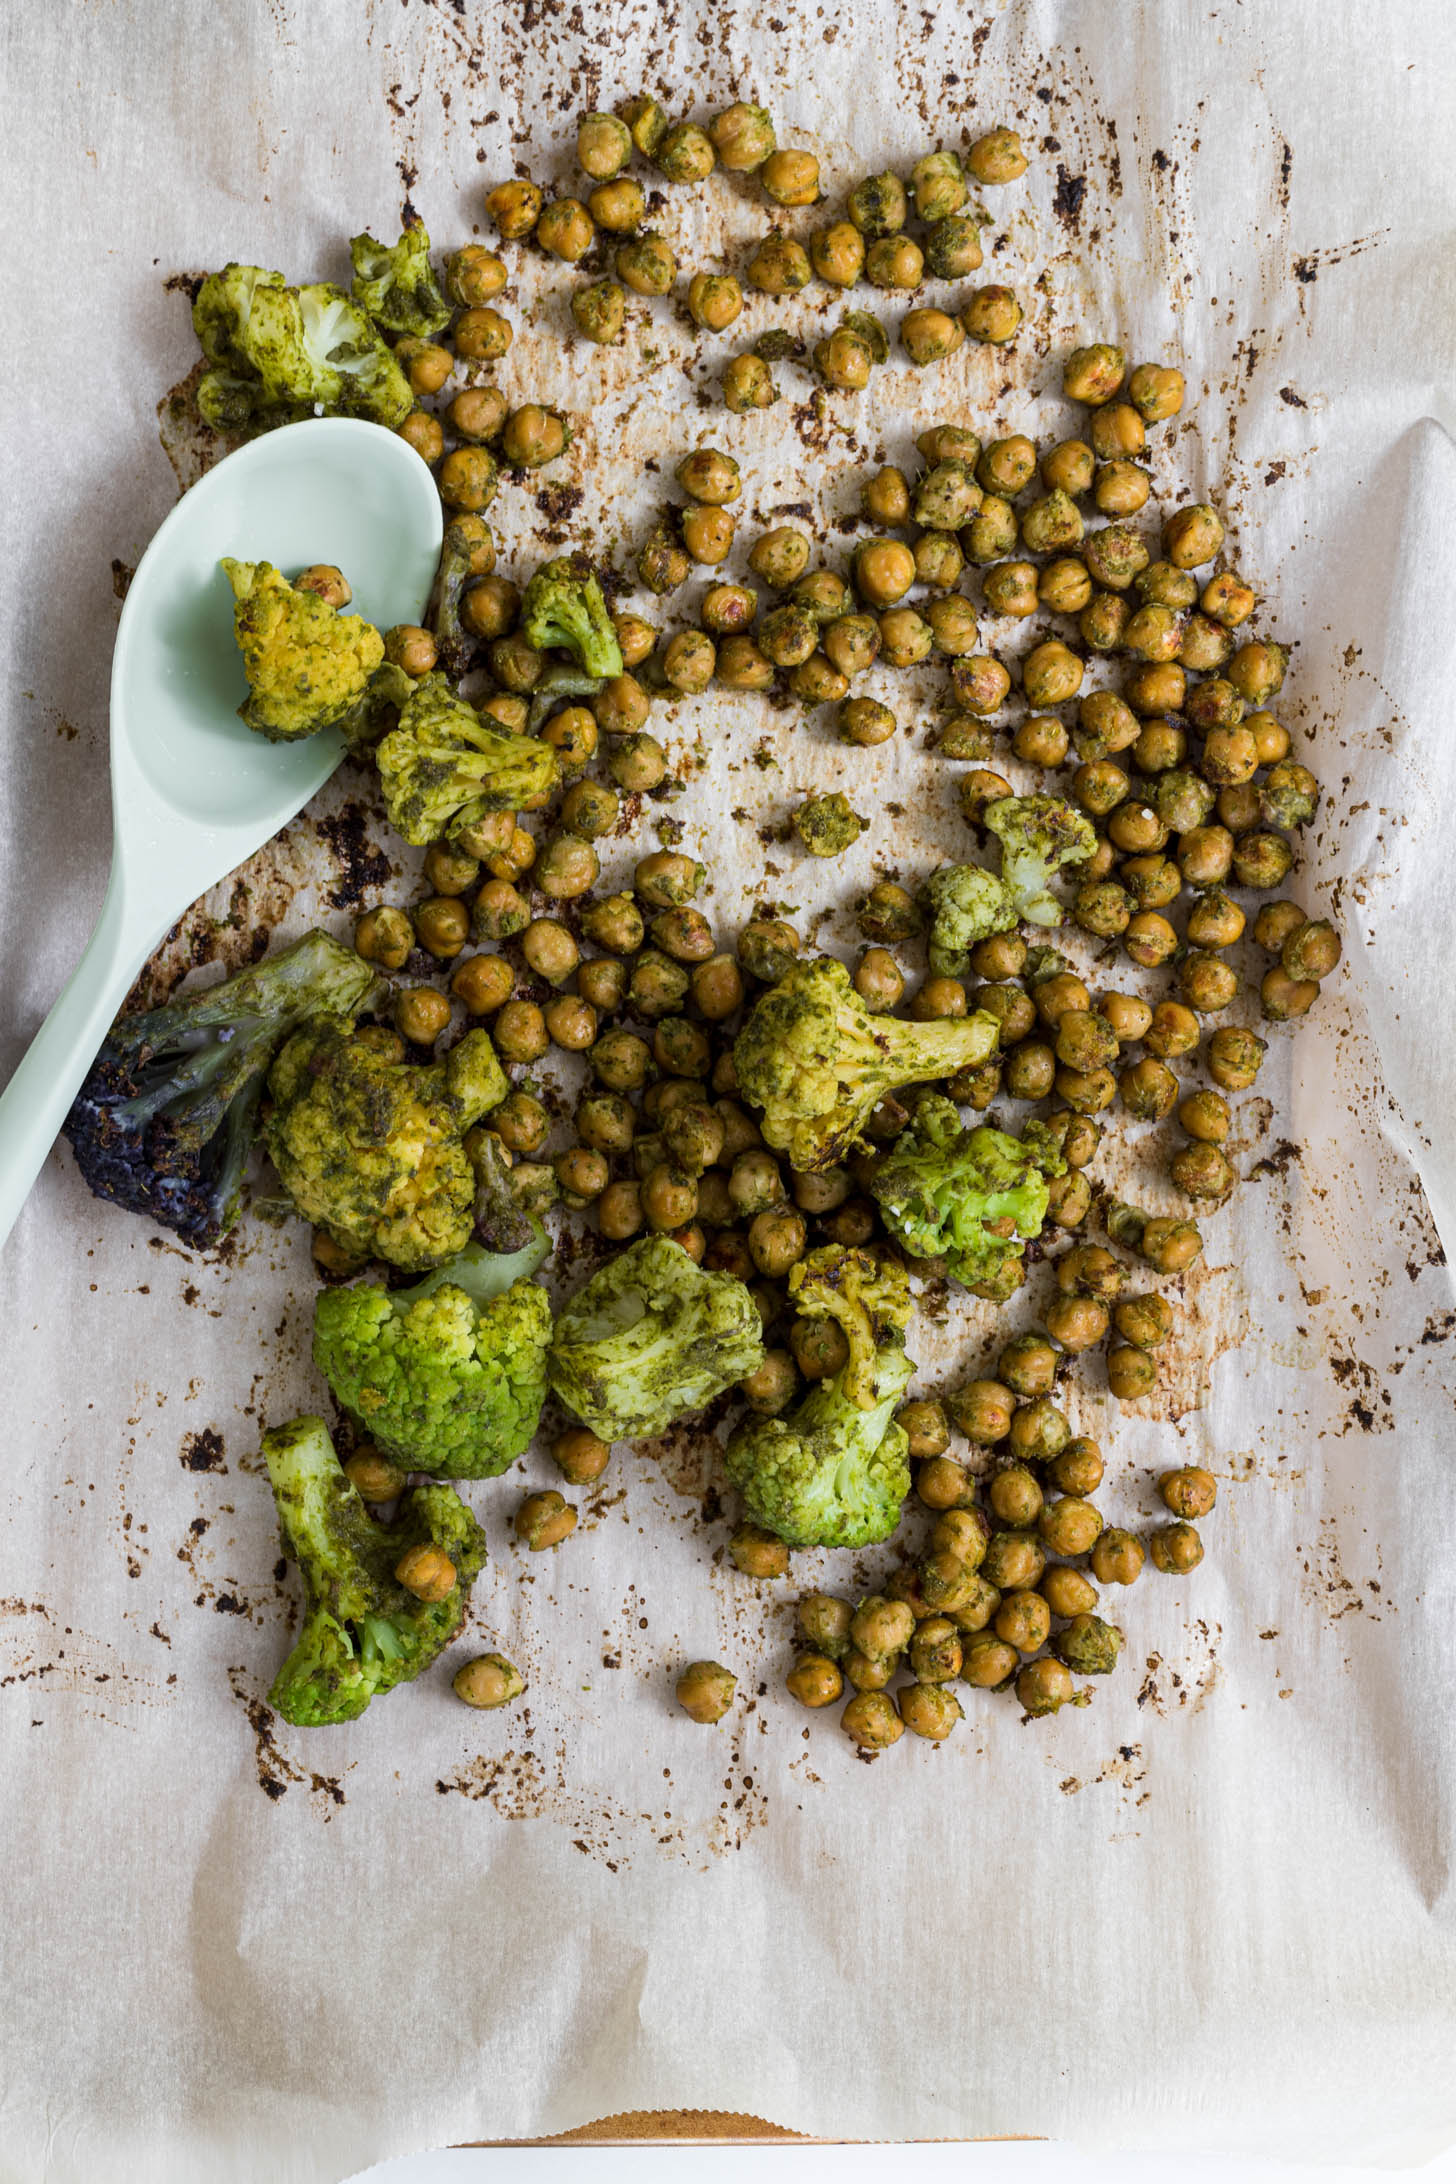 Roasted chickpeas with pesto on a baking tray.